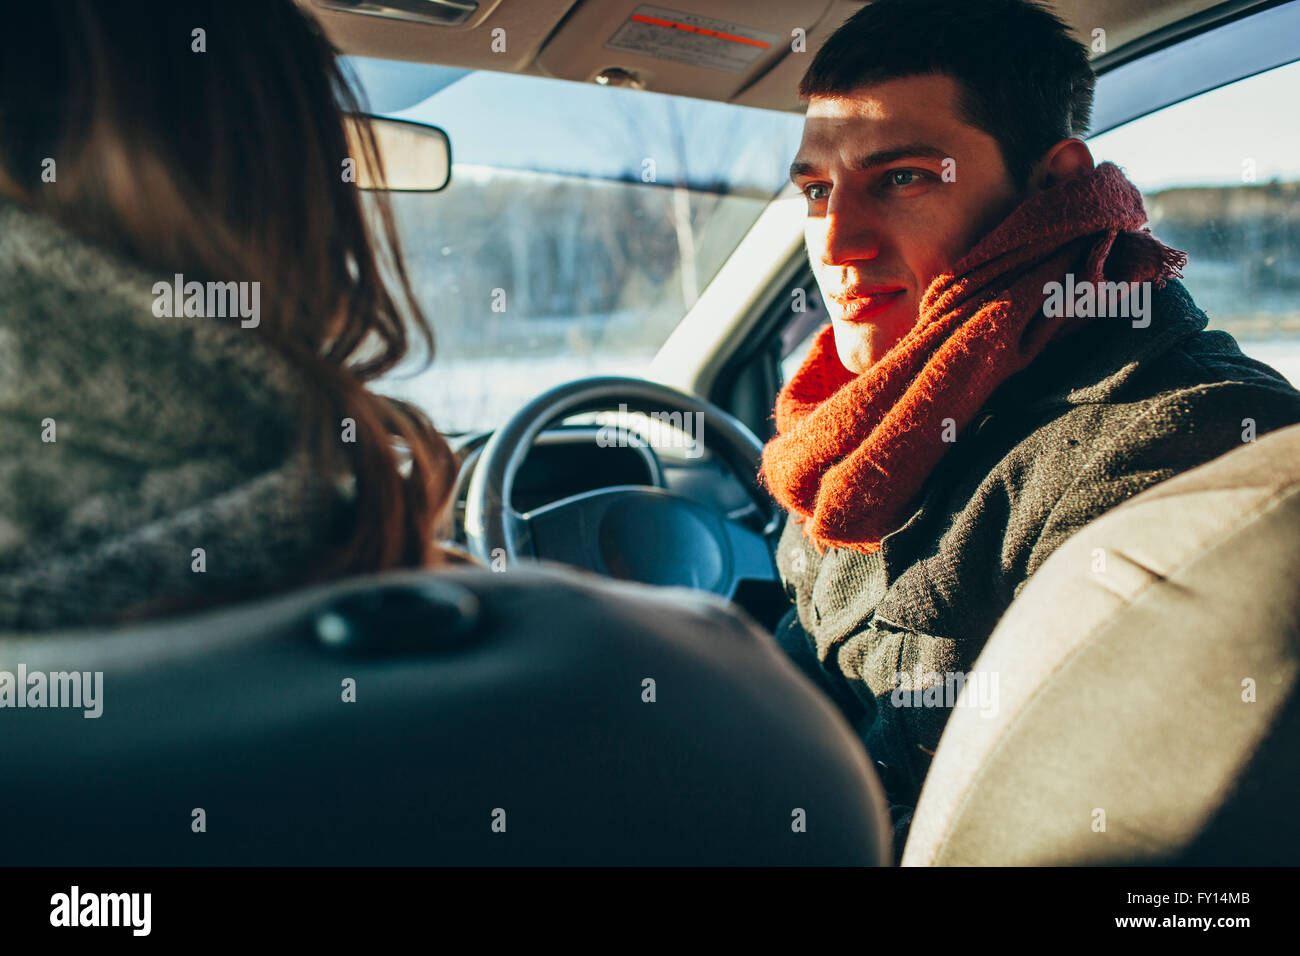 Young woman staring at woman in car Stock Photo